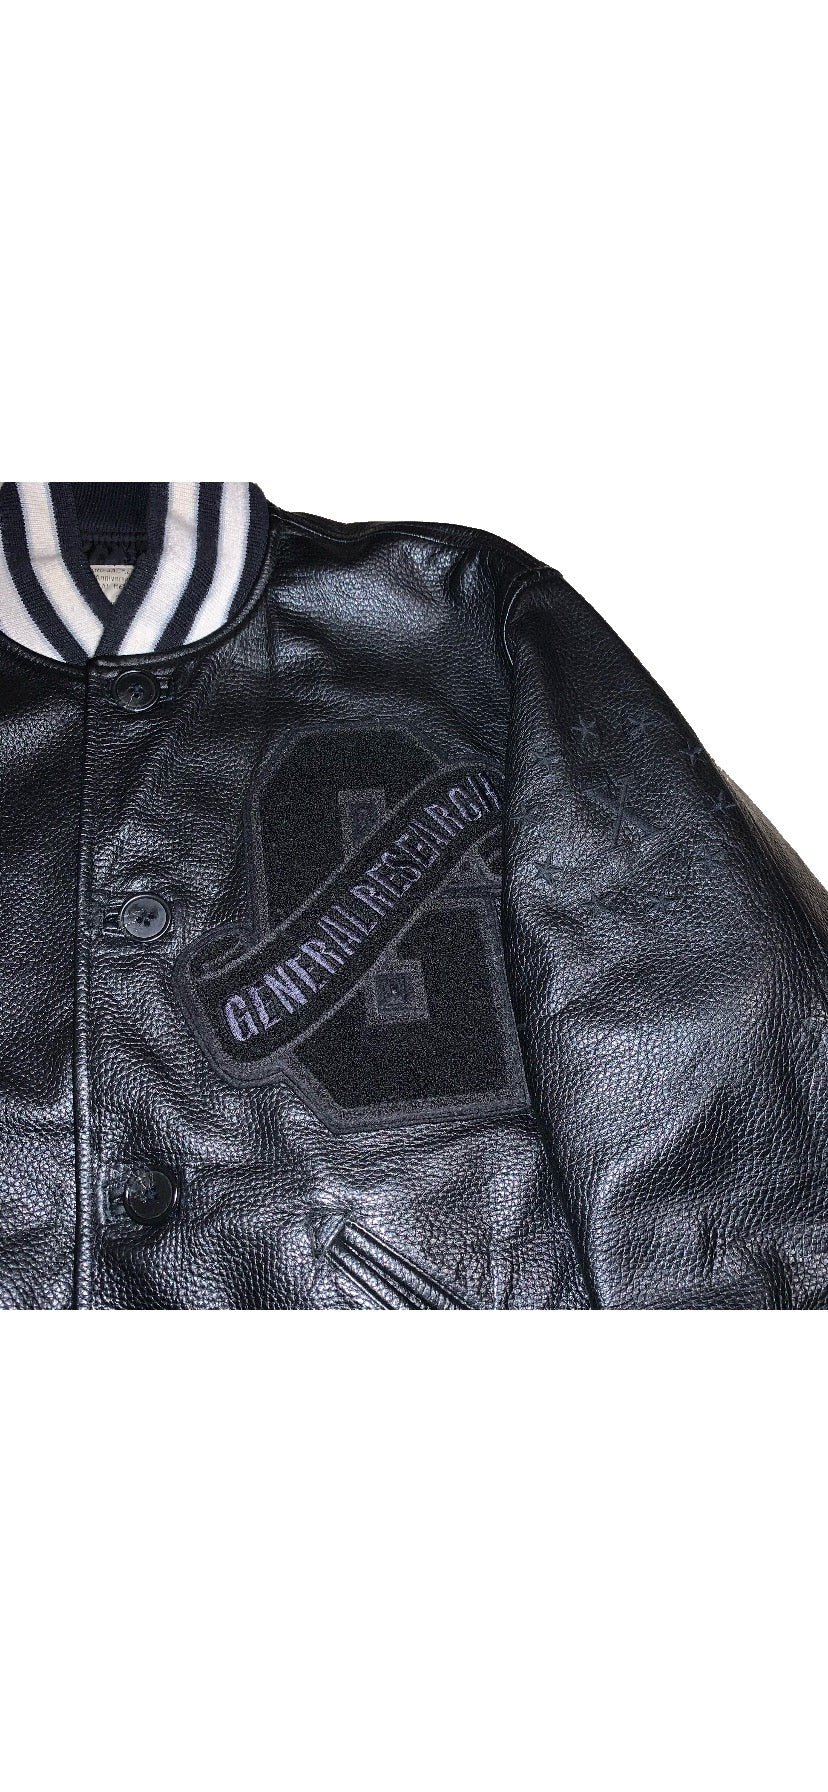 GENERAL RESEARCH 2003AW LEATHER VARSITY JACKET